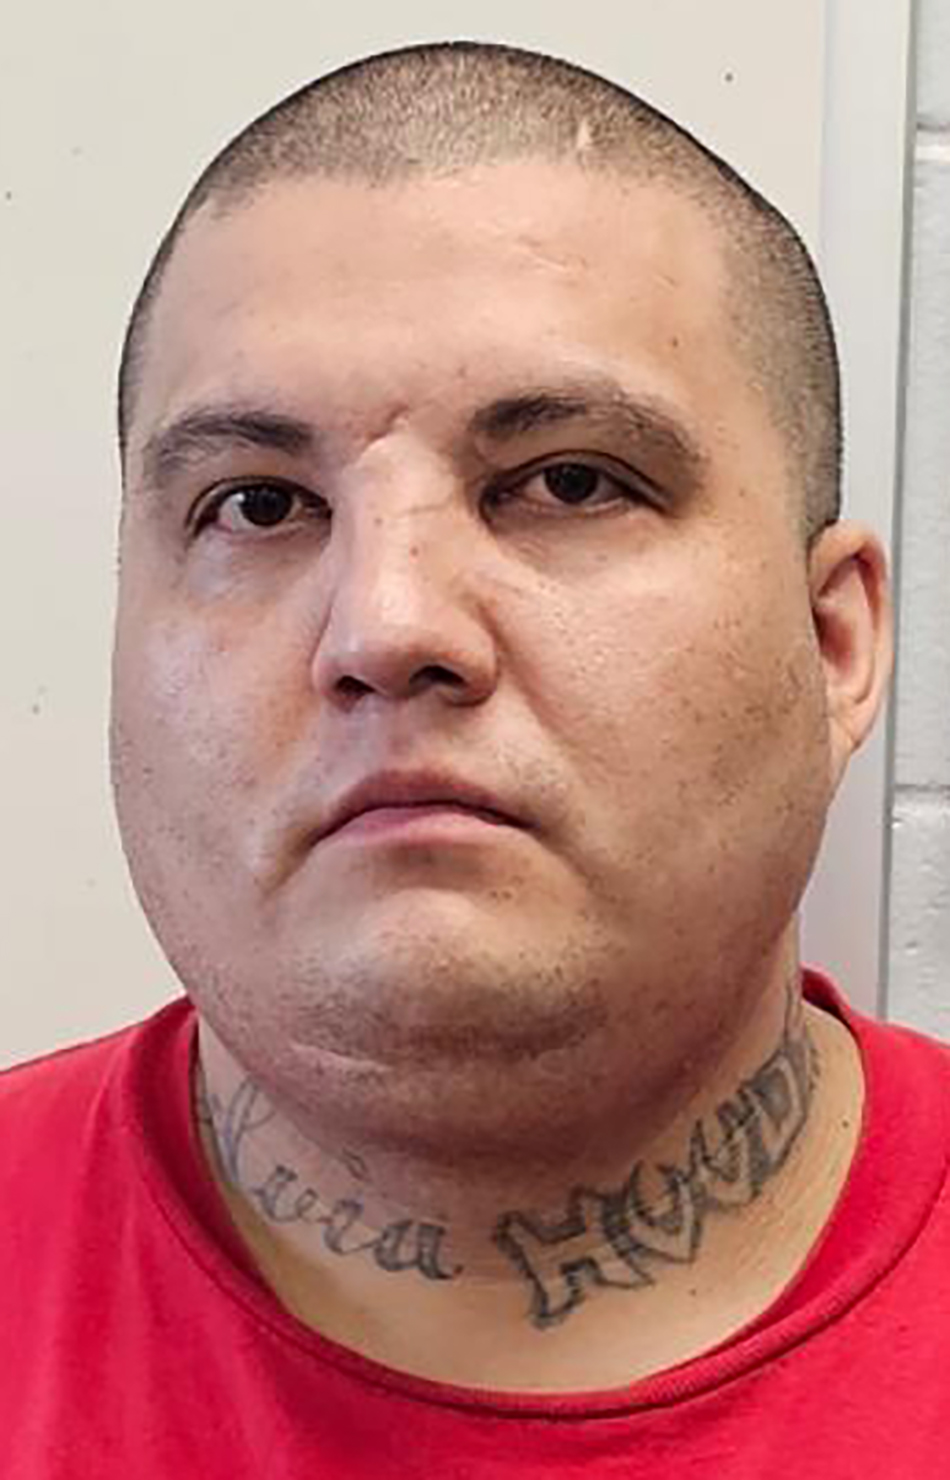 Police say 33-year-old Clay Byron Starr, also known as Chad Crate, Clayton Starr, Richard Starr, Clay Richard, and Byron Richard, is wanted for breaching conditions after he was released from federal custody on June 20.